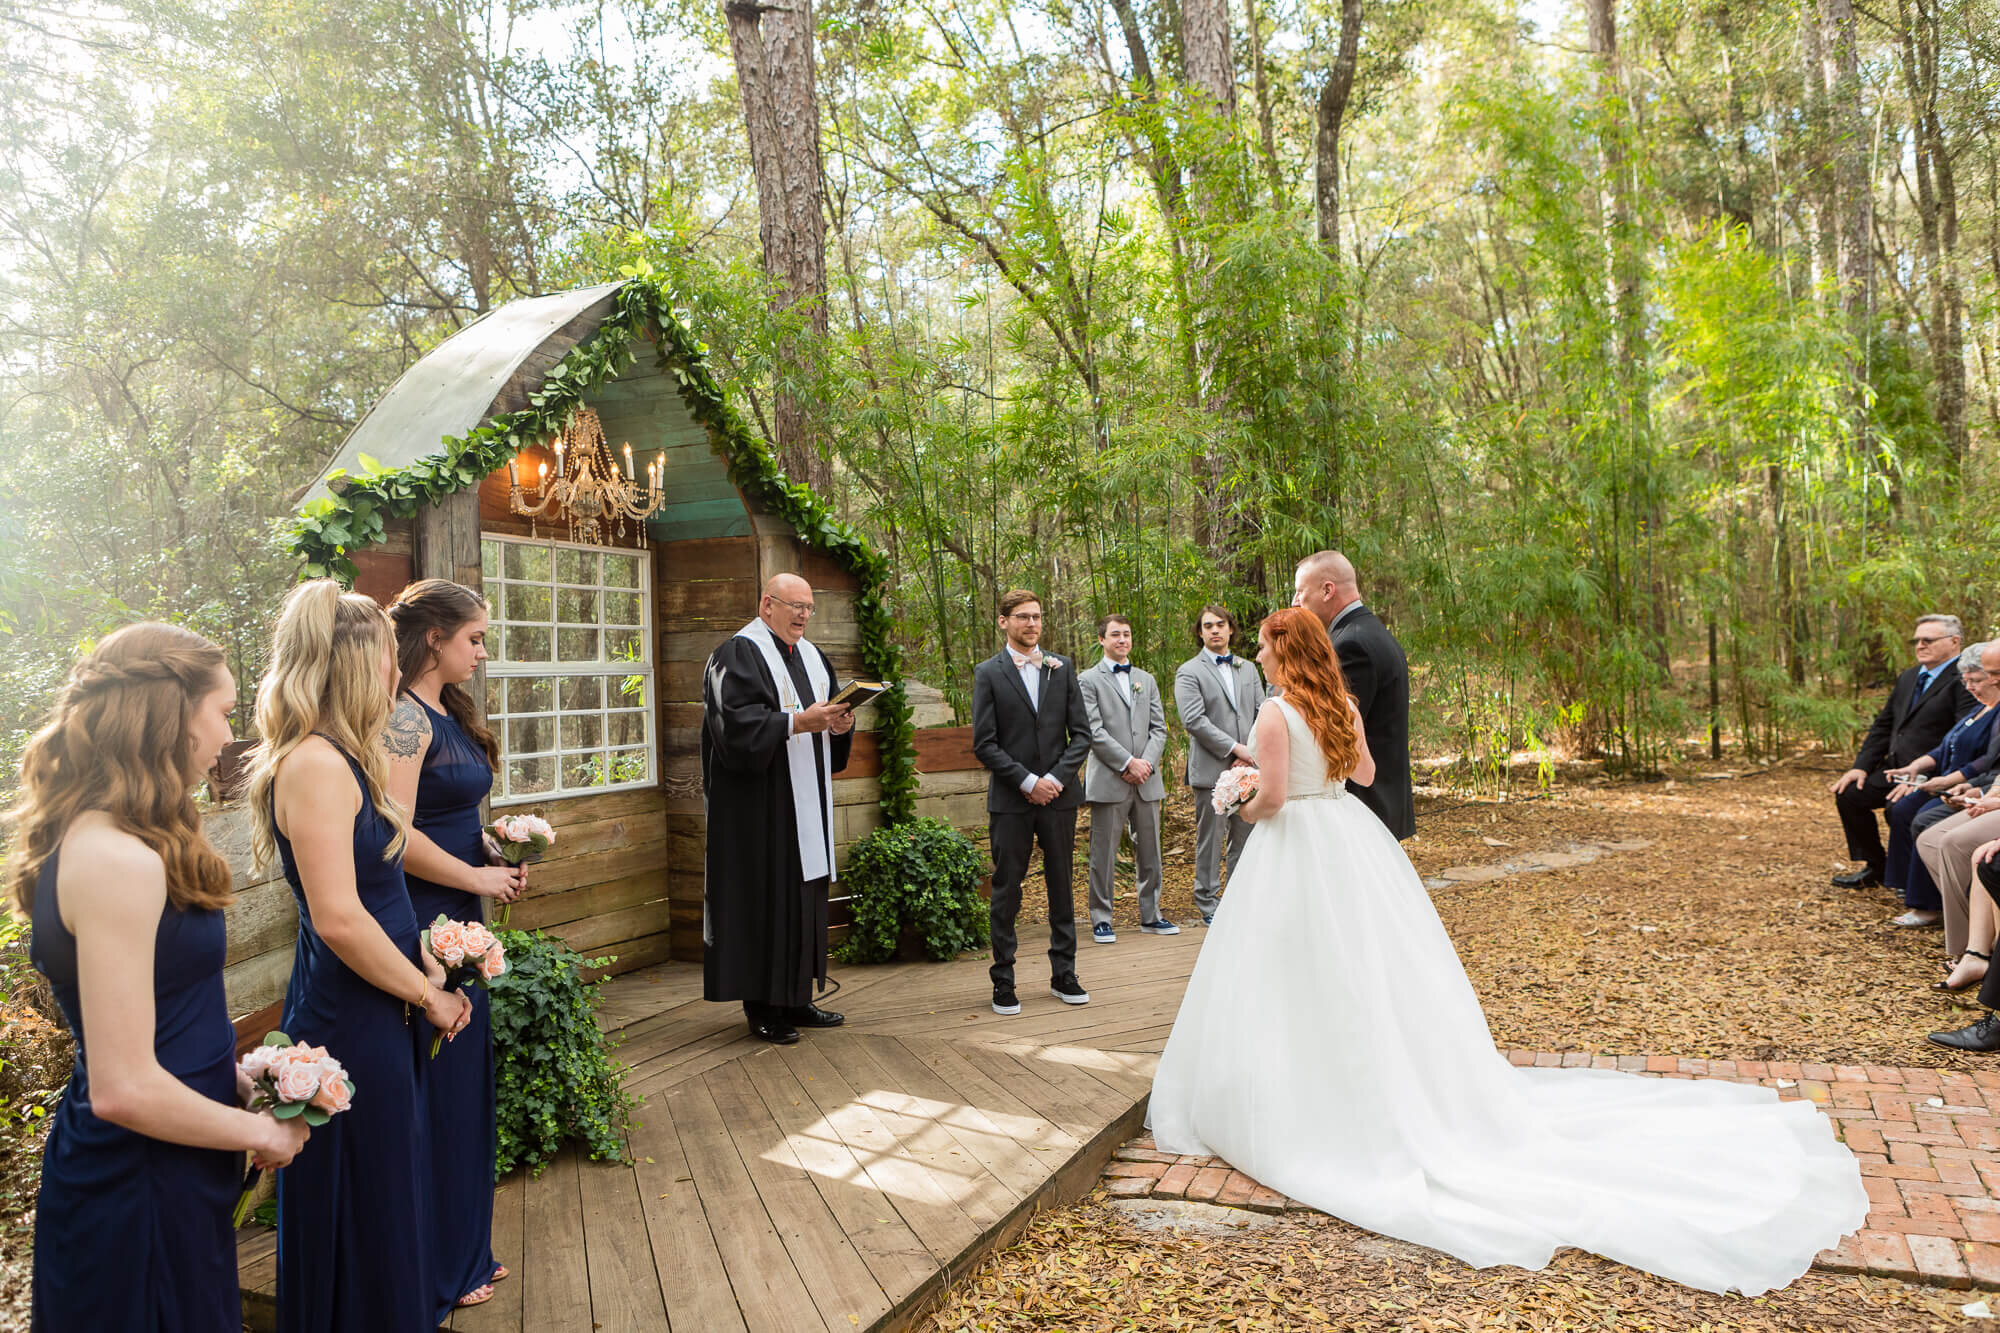  Taylor and Will's wedding at Deland's Bridle Oaks Barn 